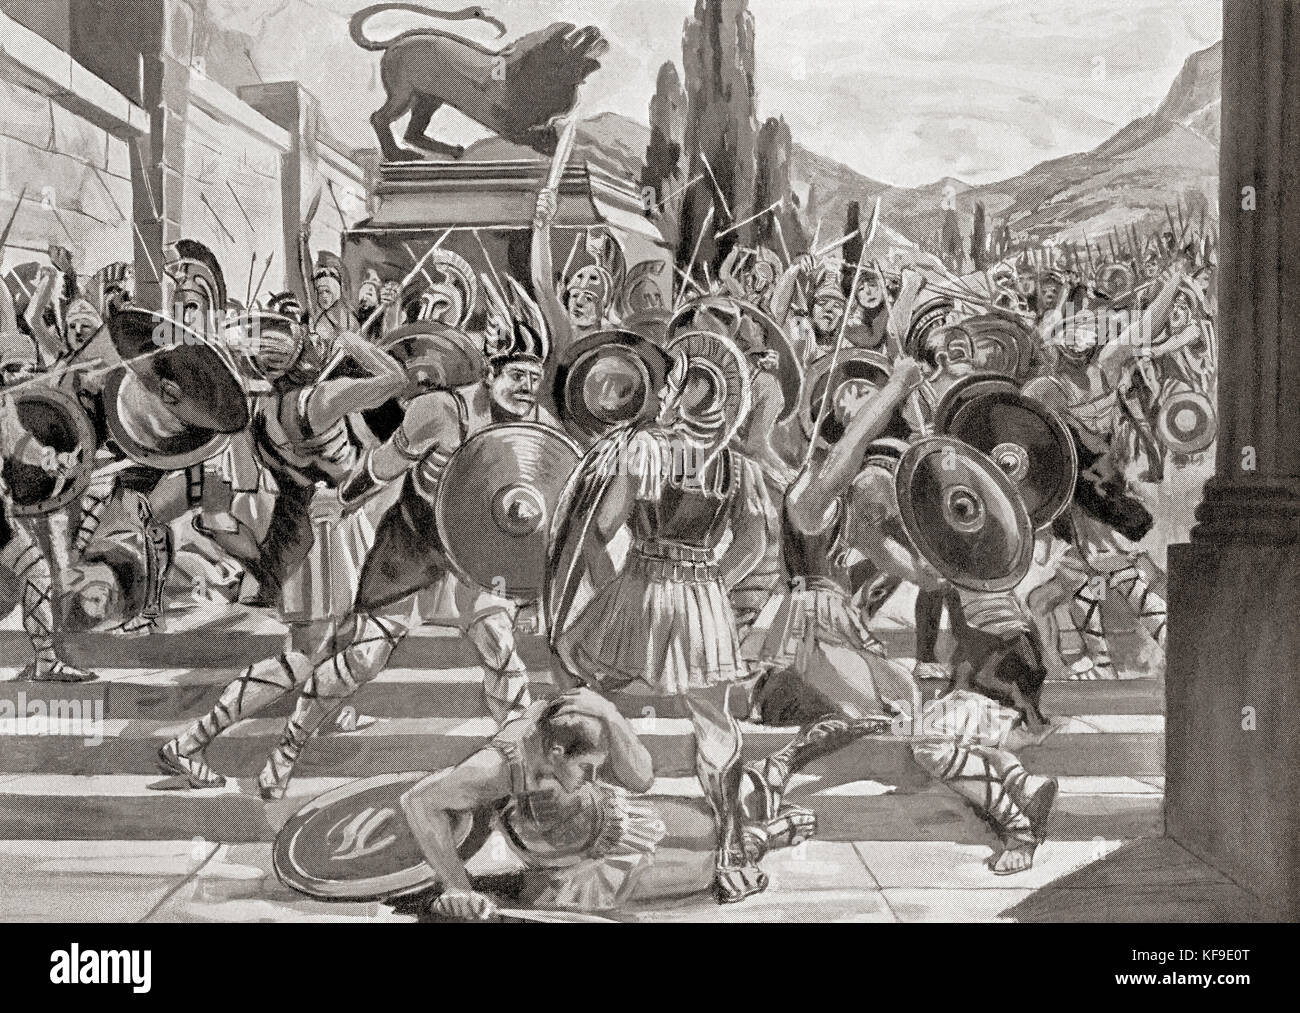 The Gauls under the leadership of Brennus aka Brennos, invading Macedonia, 280 BC.   Brennus aka Brennos d. 279 BC. Gaul leader of the army of the Gallic invasion of the Balkans.  From Hutchinson's History of the Nations, published 1915. Stock Photo